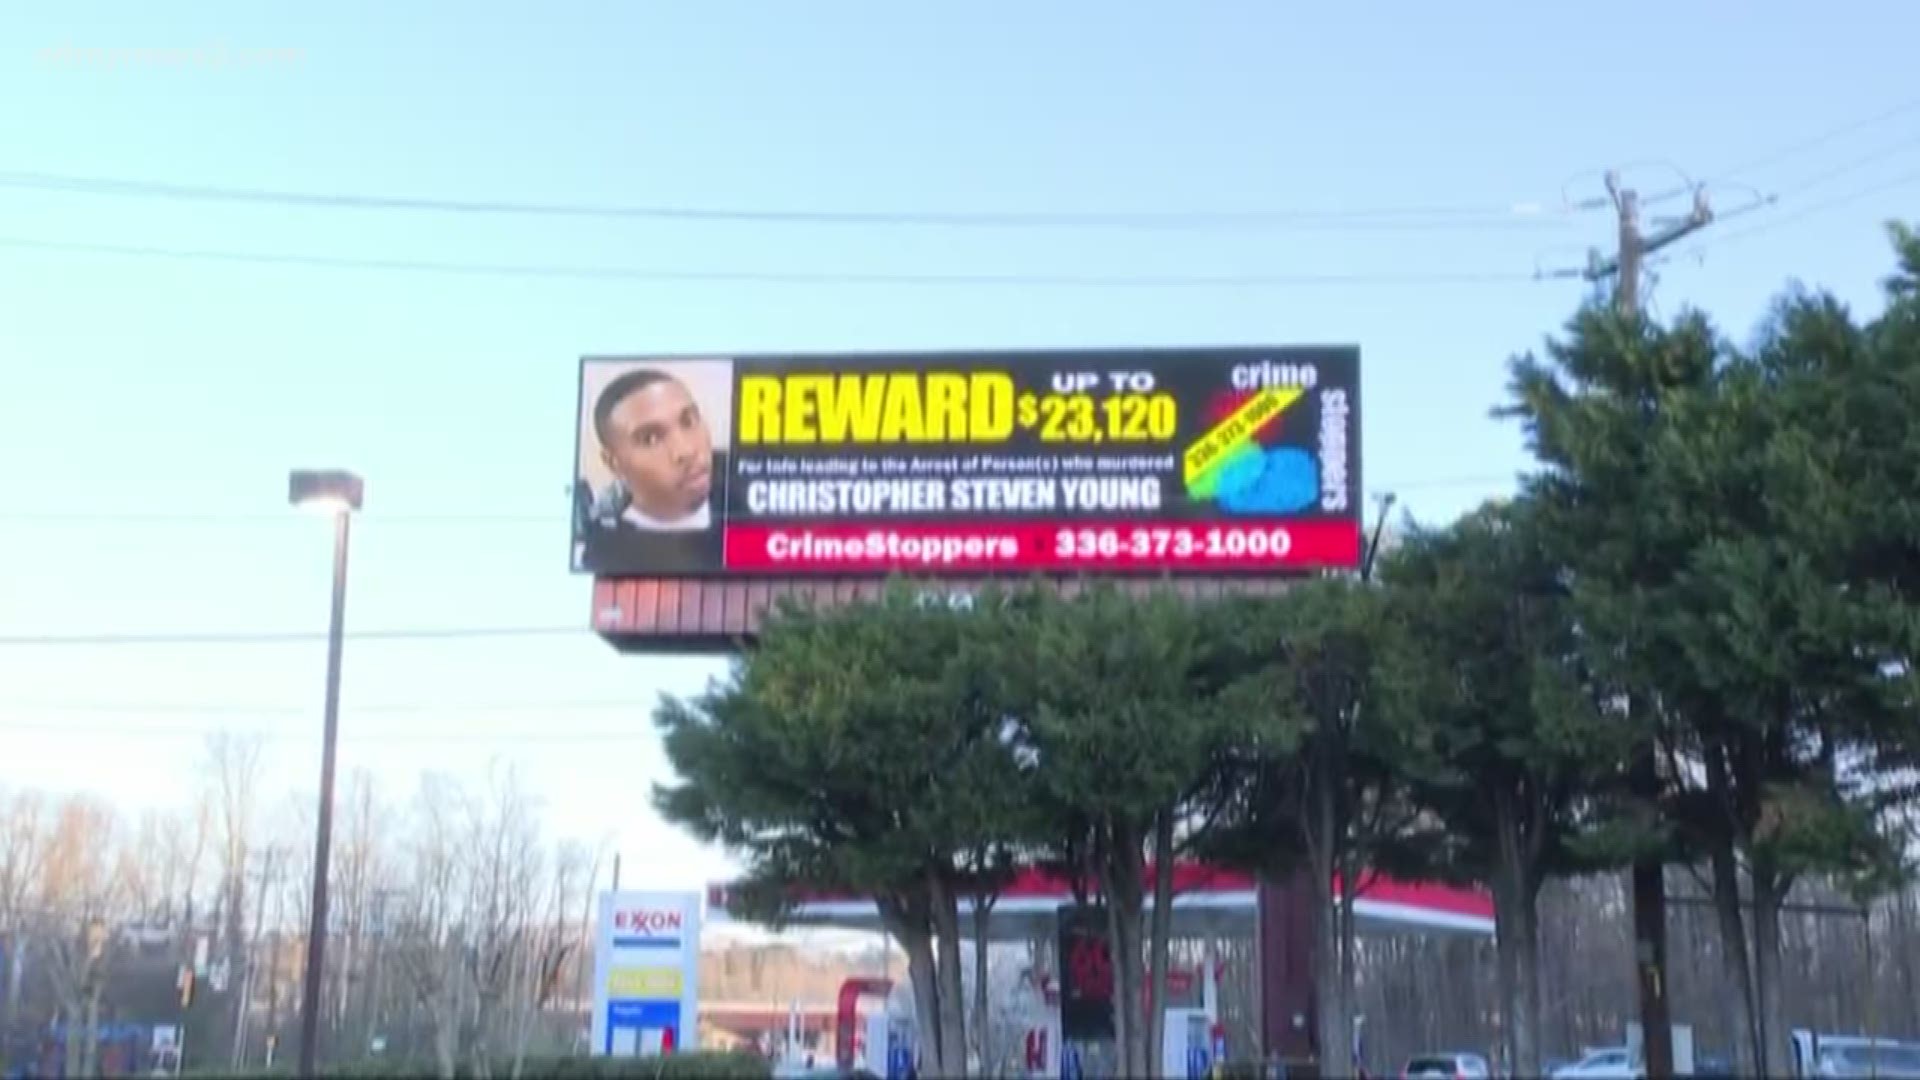 Crimestoppers is offering up to $23,102 reward for information that leads to an arrest in the death of Christopher Young.